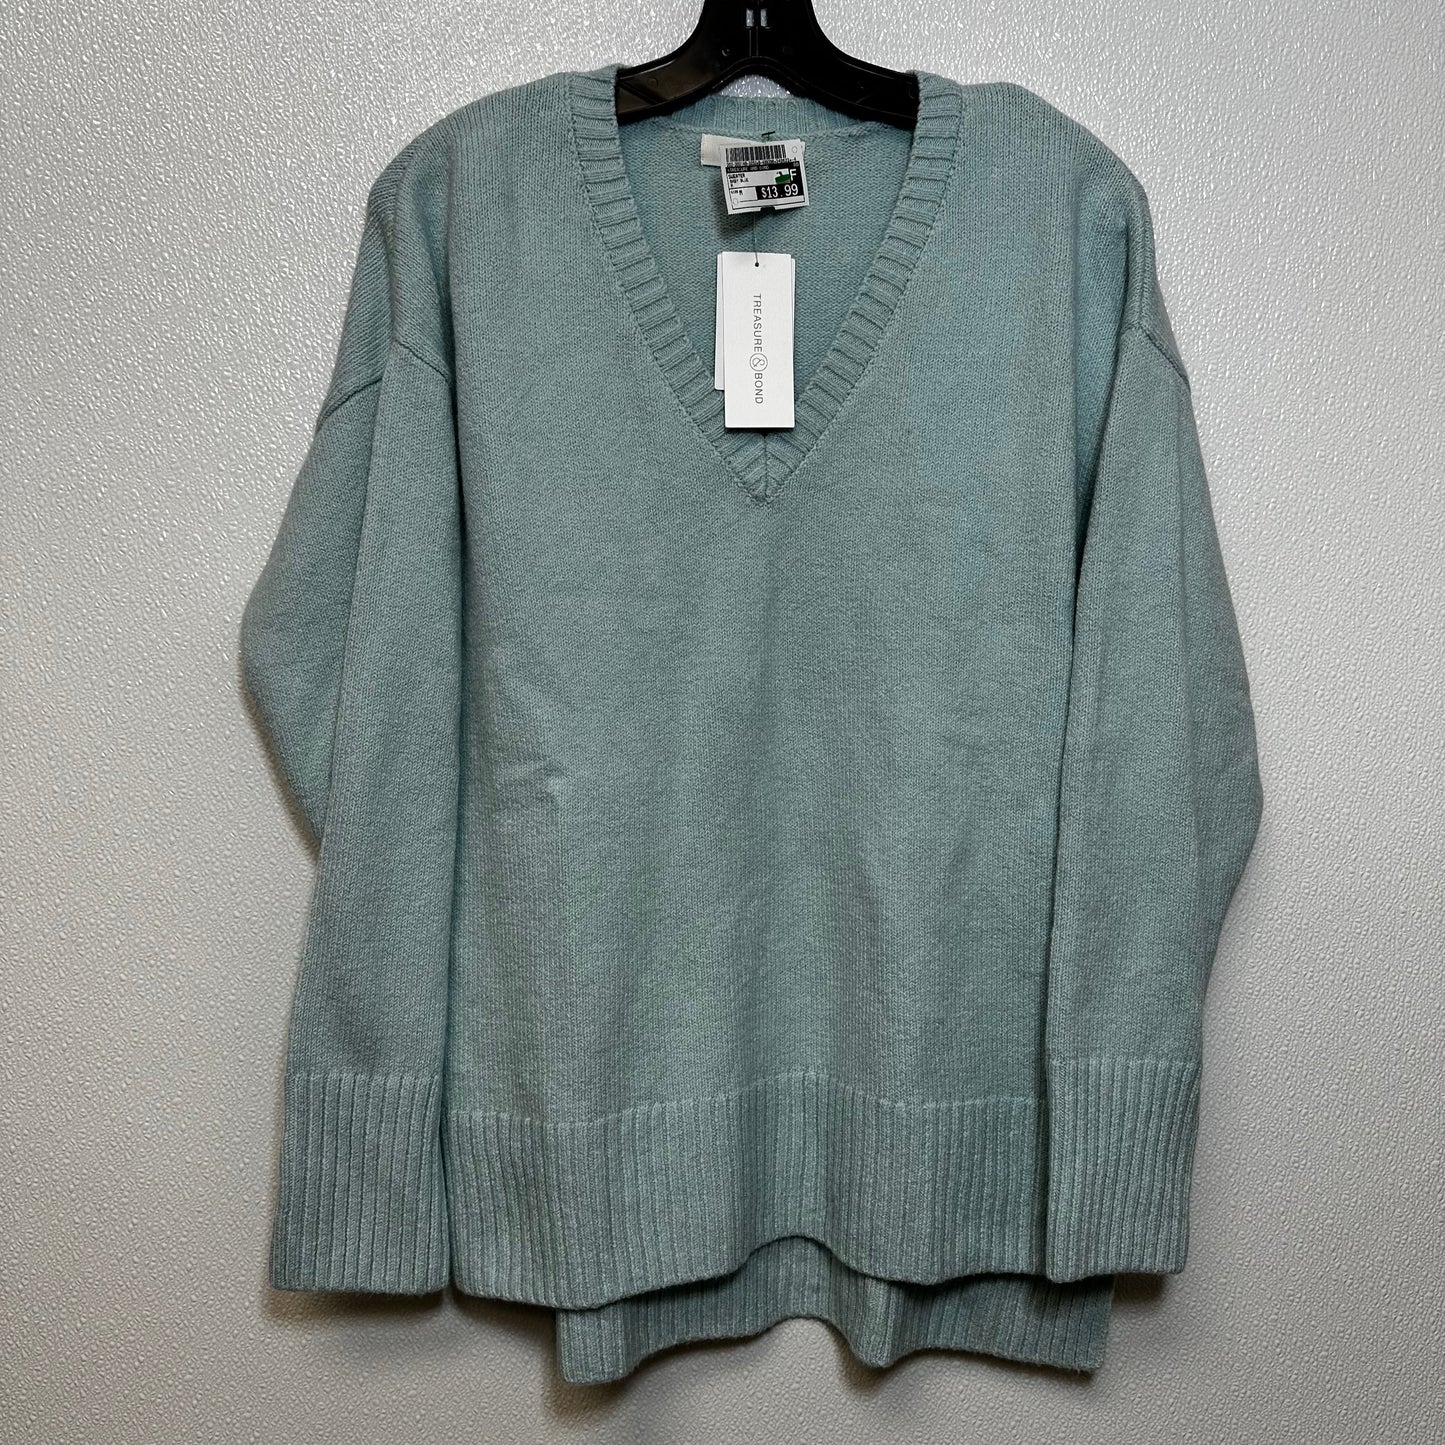 Baby Blue Sweater Treasure And Bond, Size M